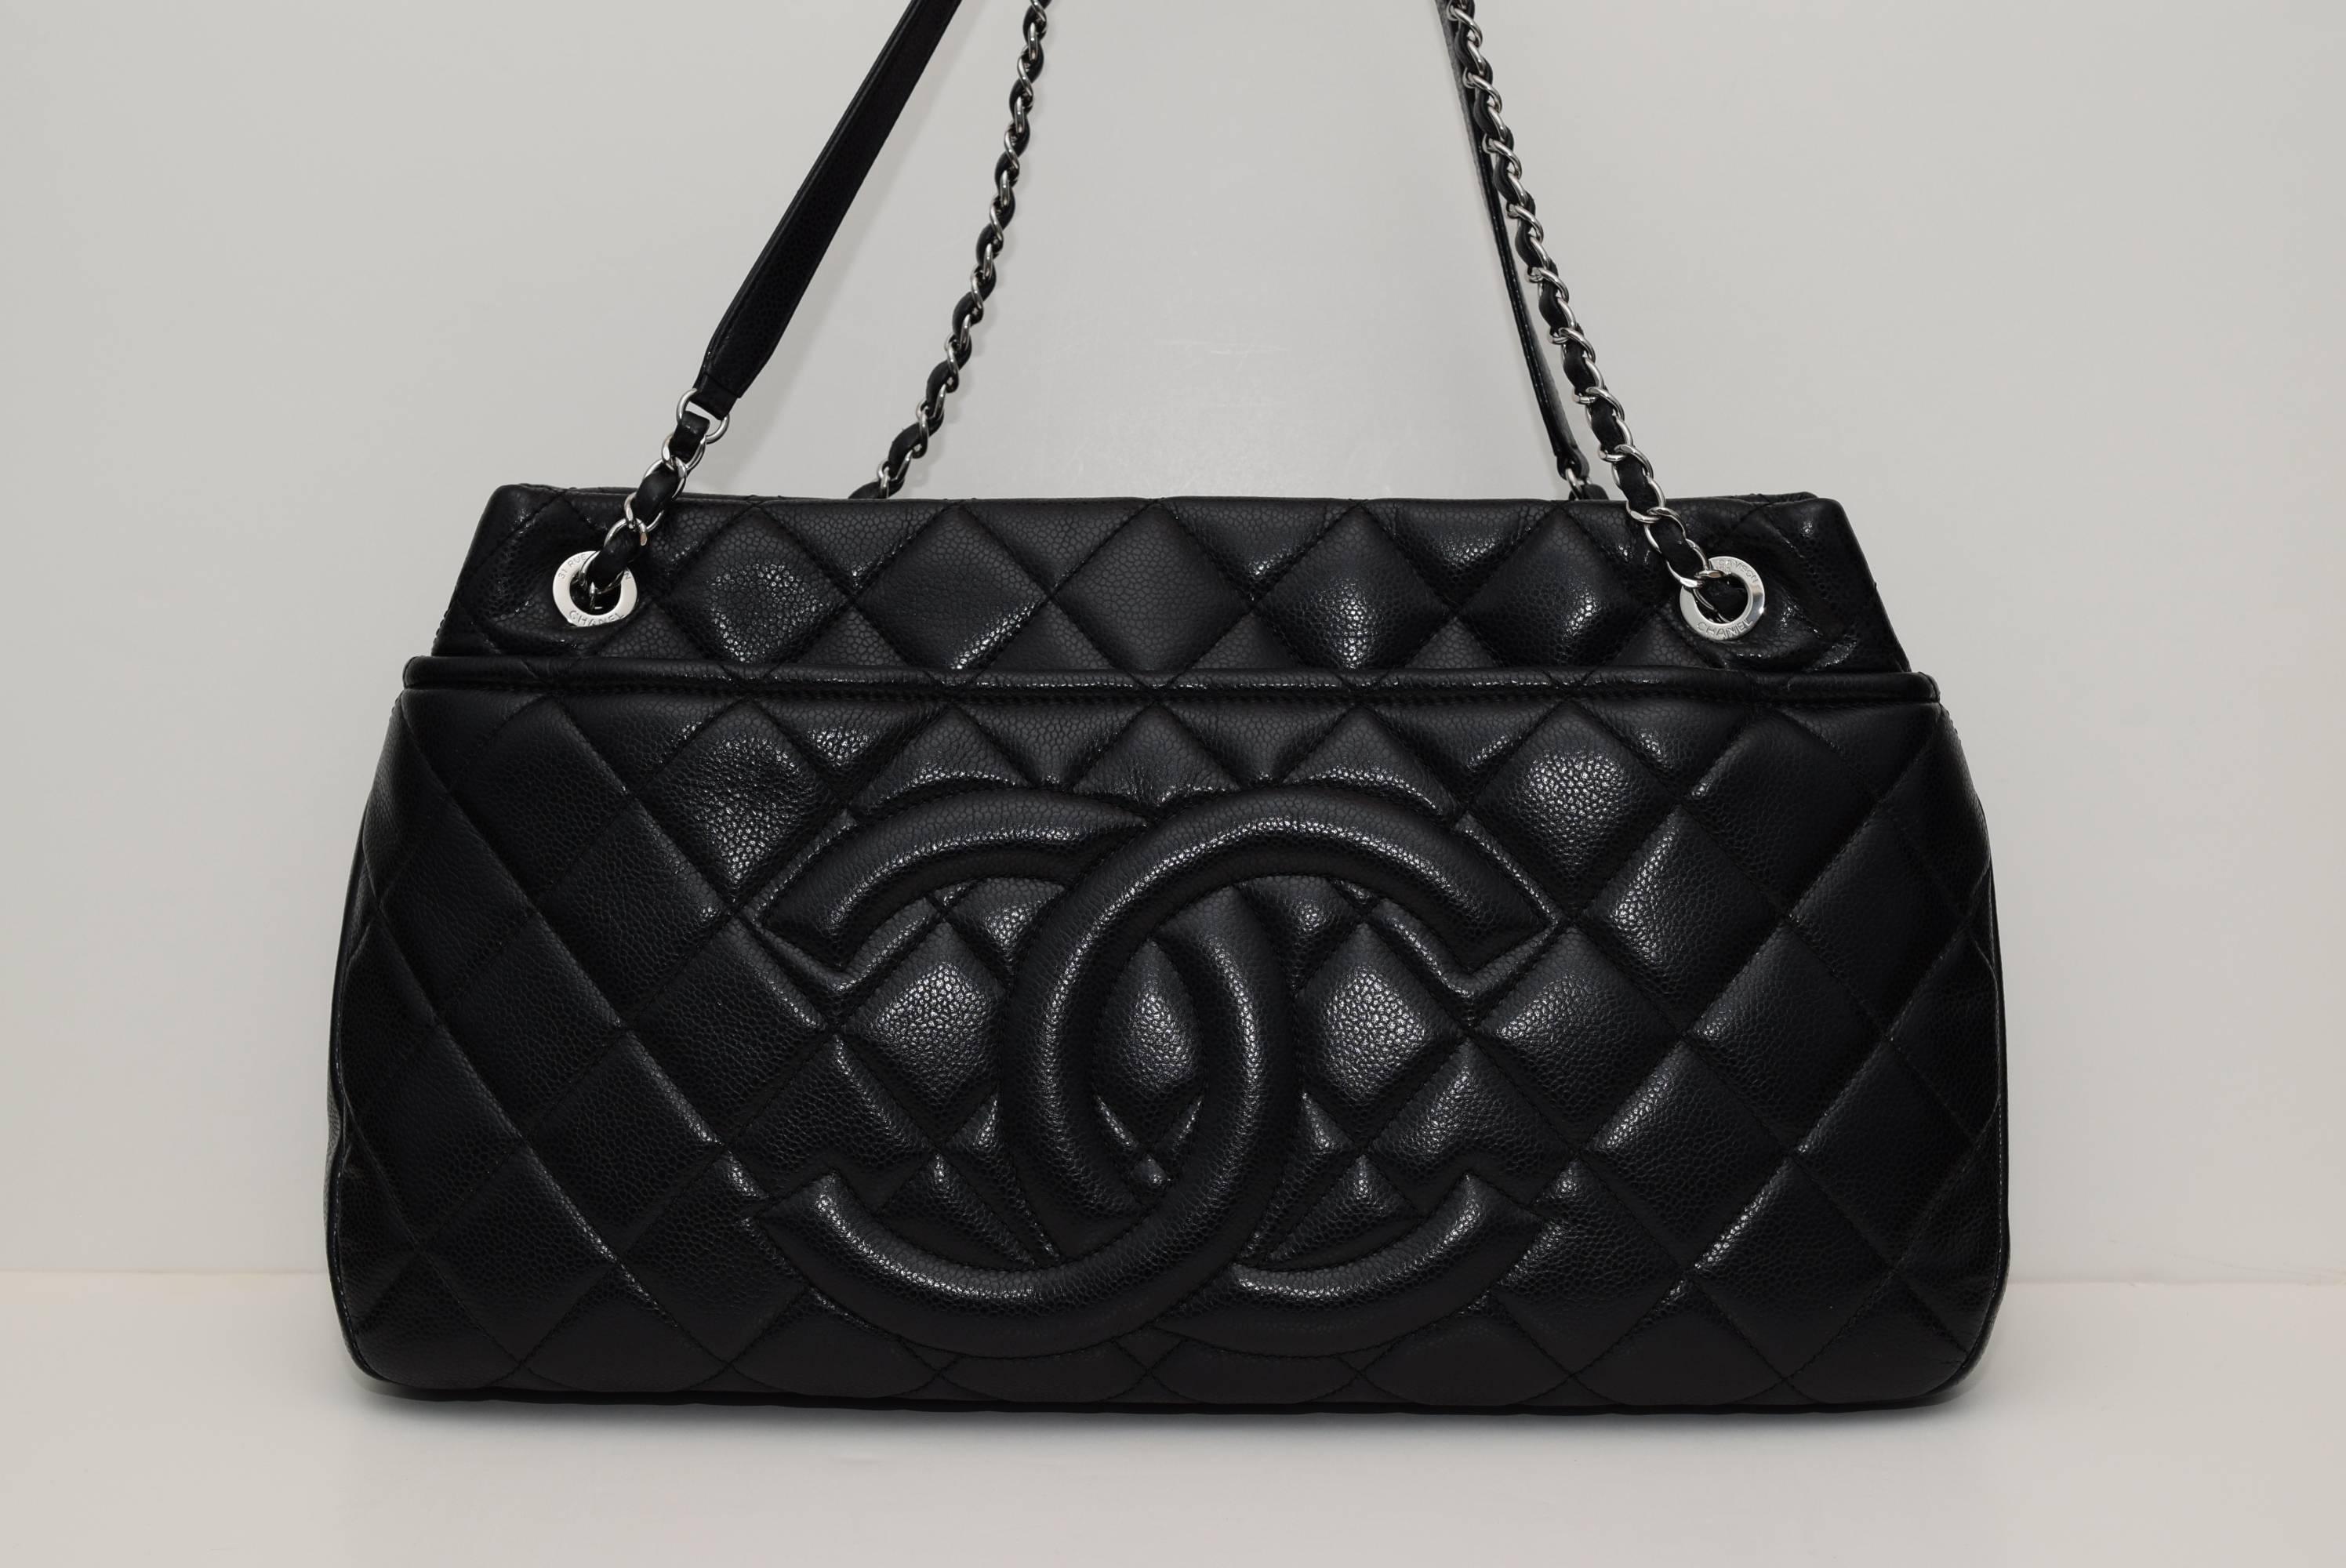 Women's Chanel Black Caviar Leather Quilted 42 cm Shoulder bag .Circa :2015